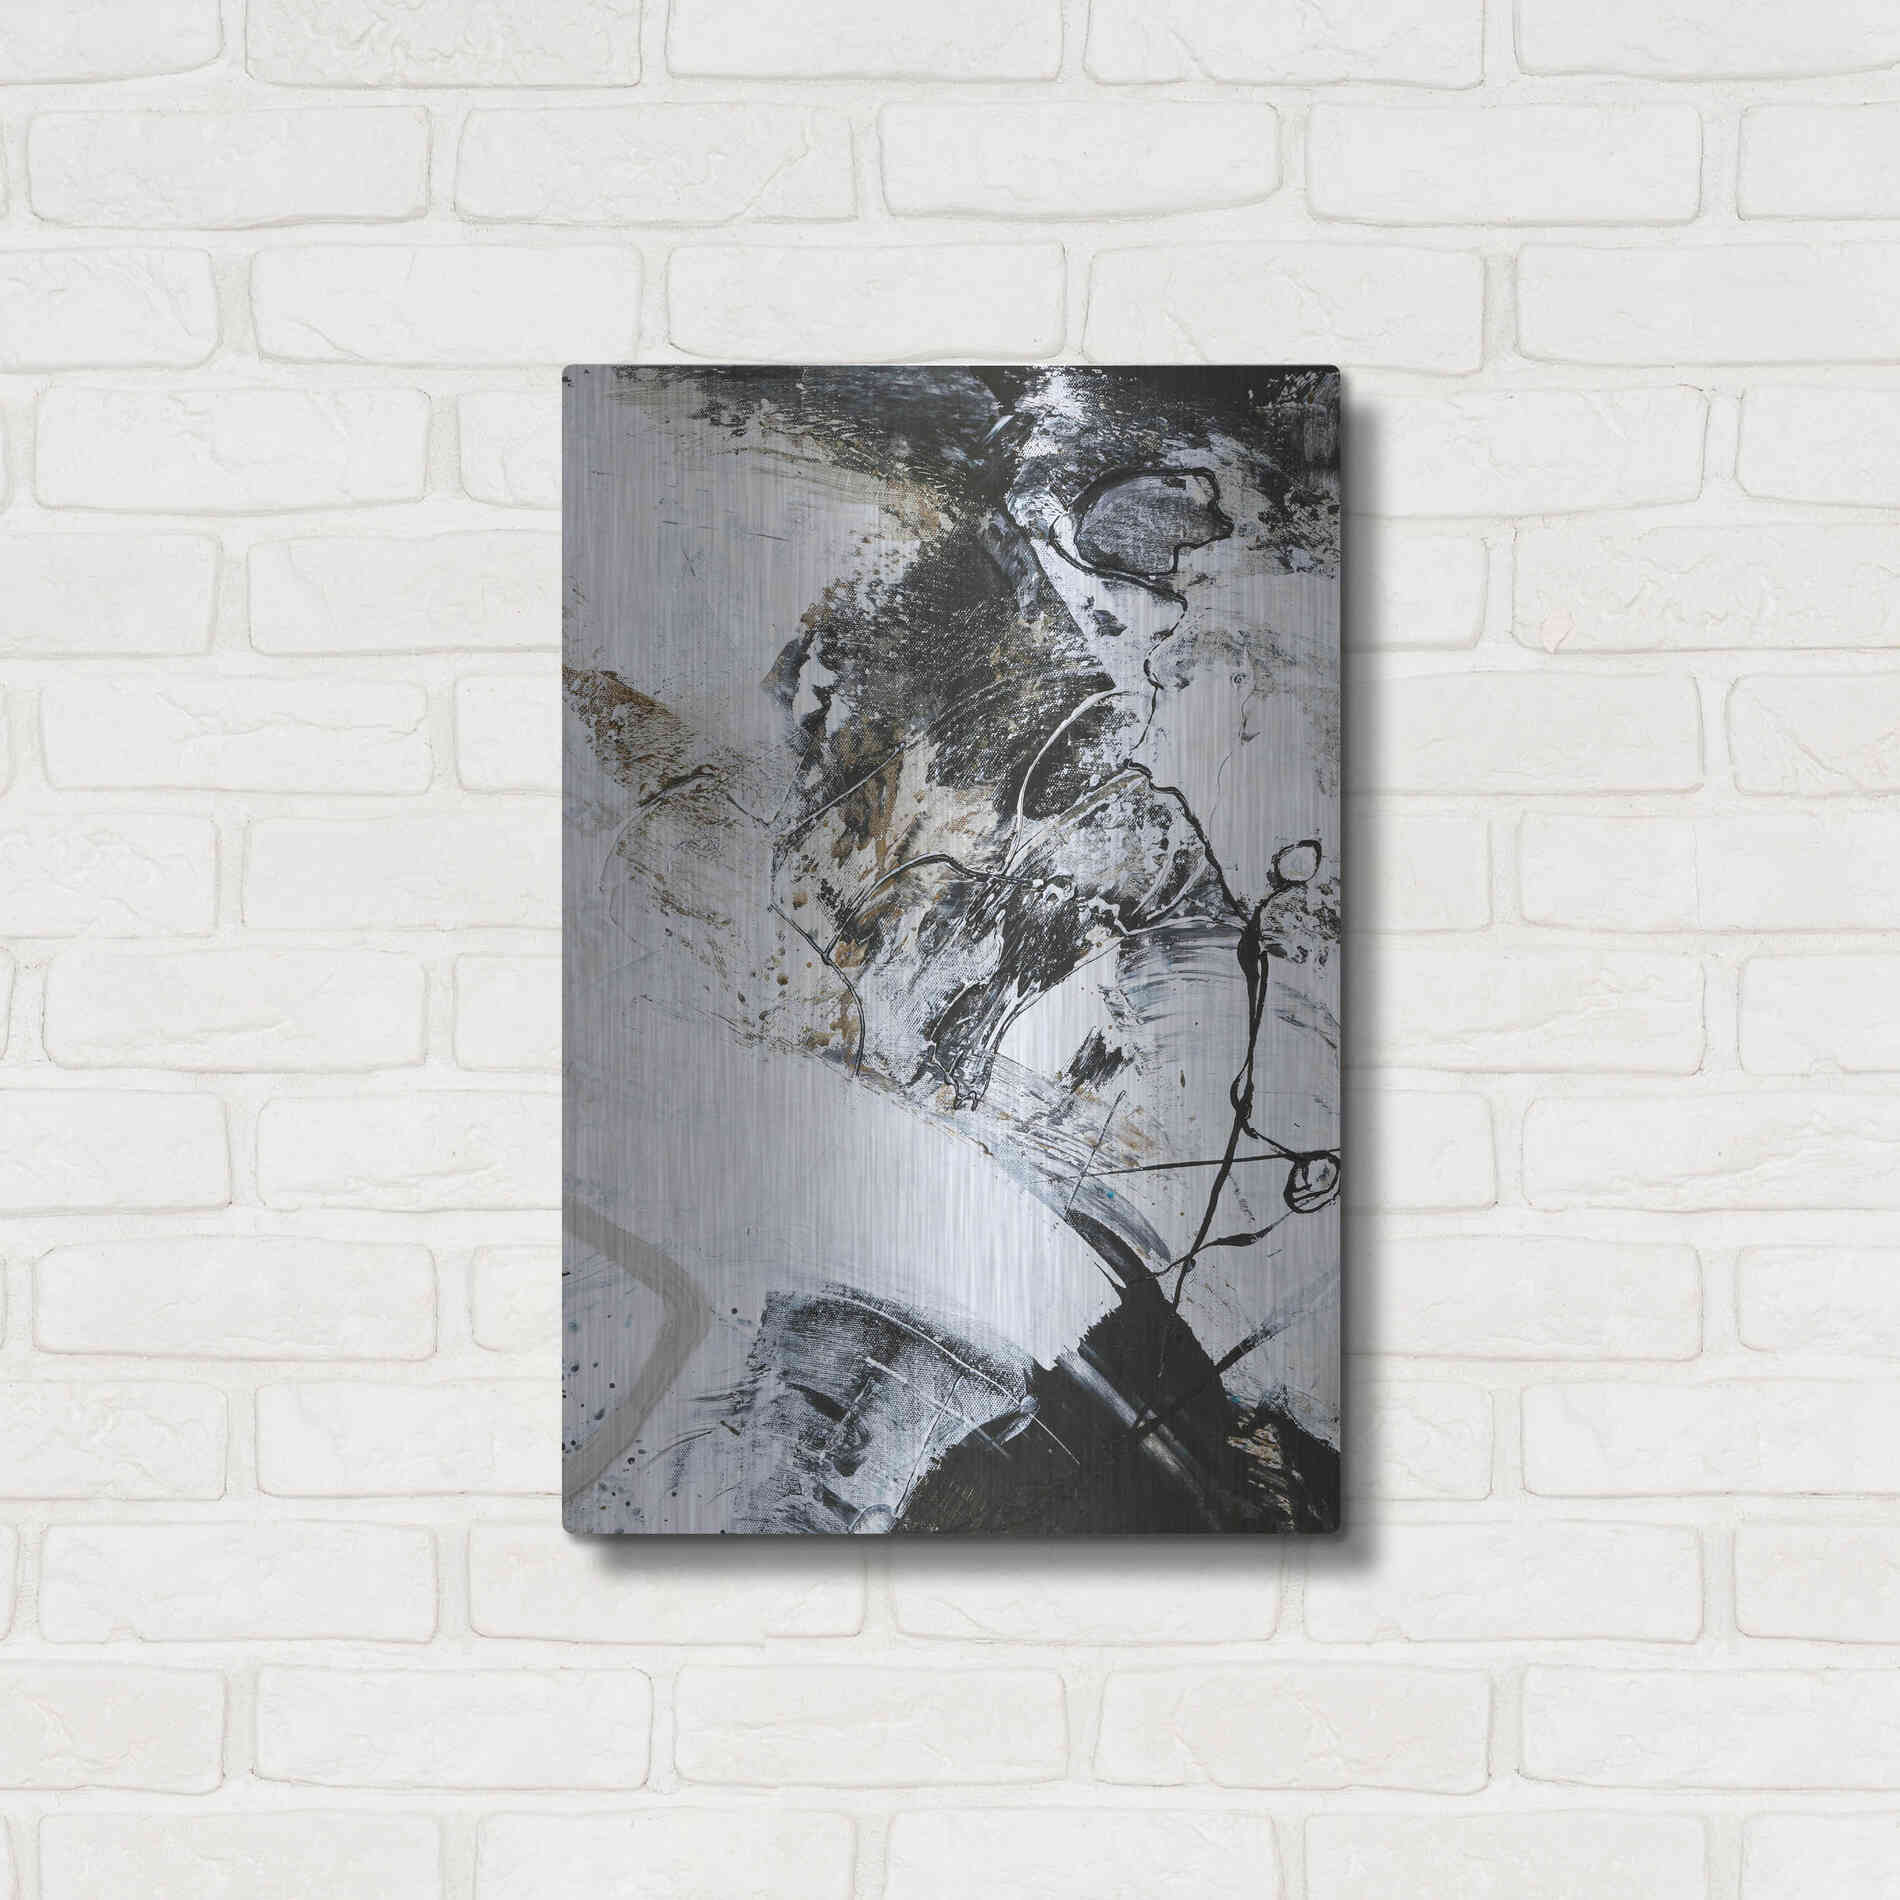 Luxe Metal Art 'Black and White 1' by Design Fabrikken, Metal Wall Art,16x24